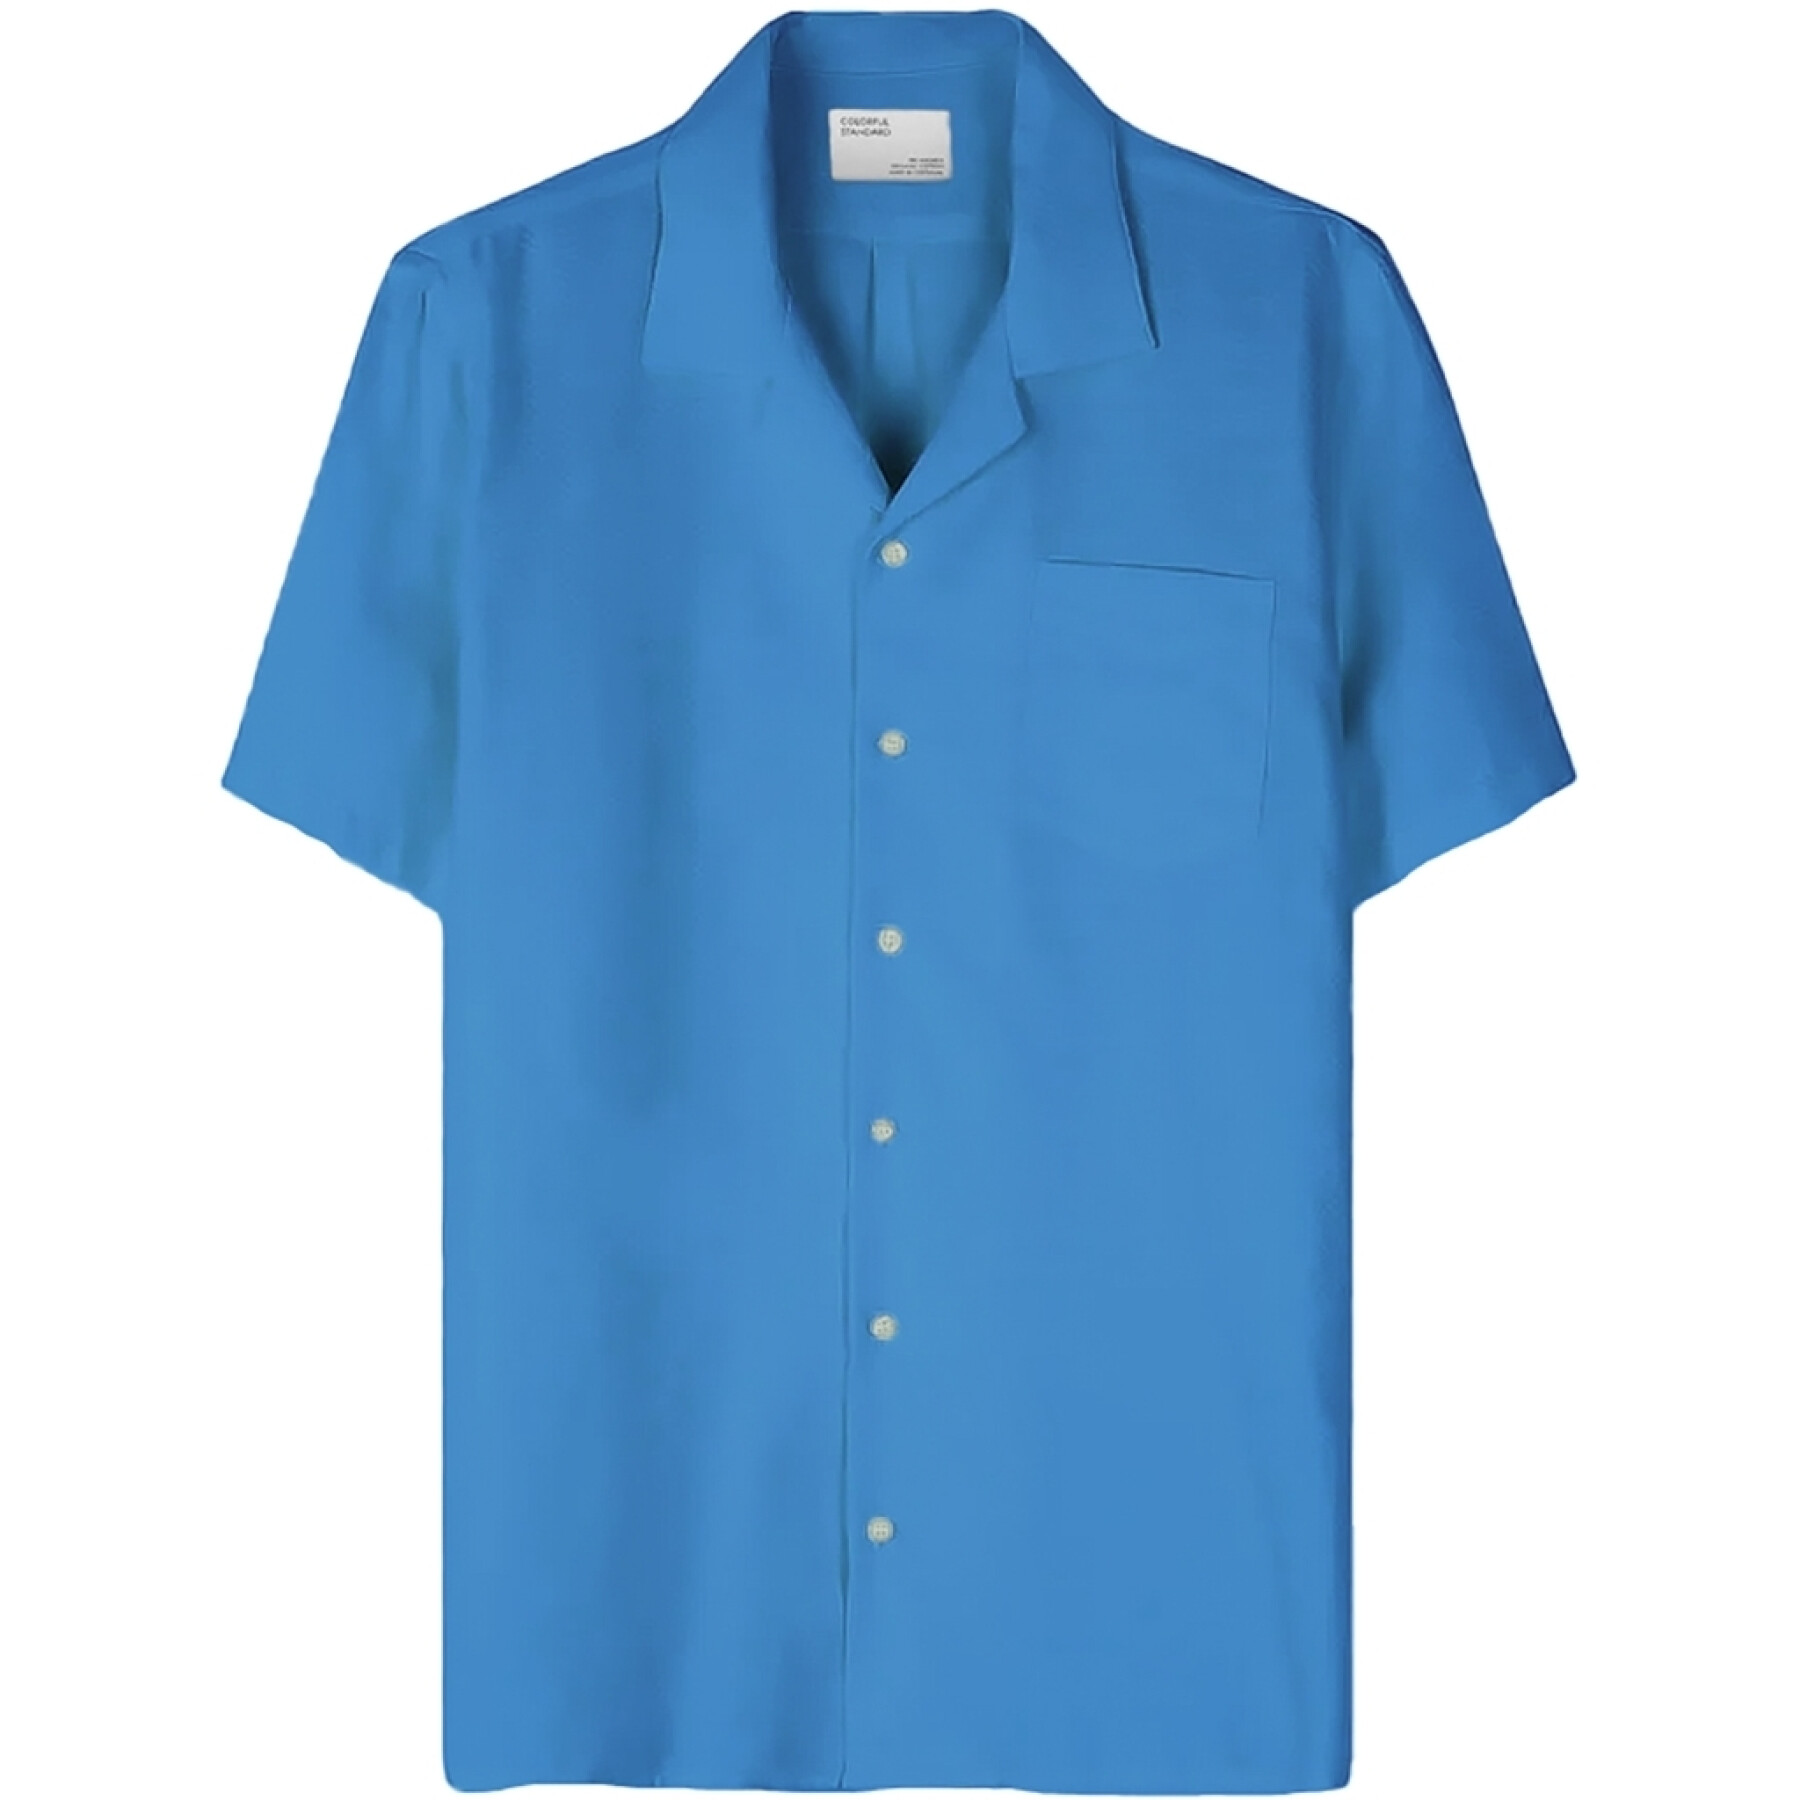 Shirt Colorful Standard Pacific Blue